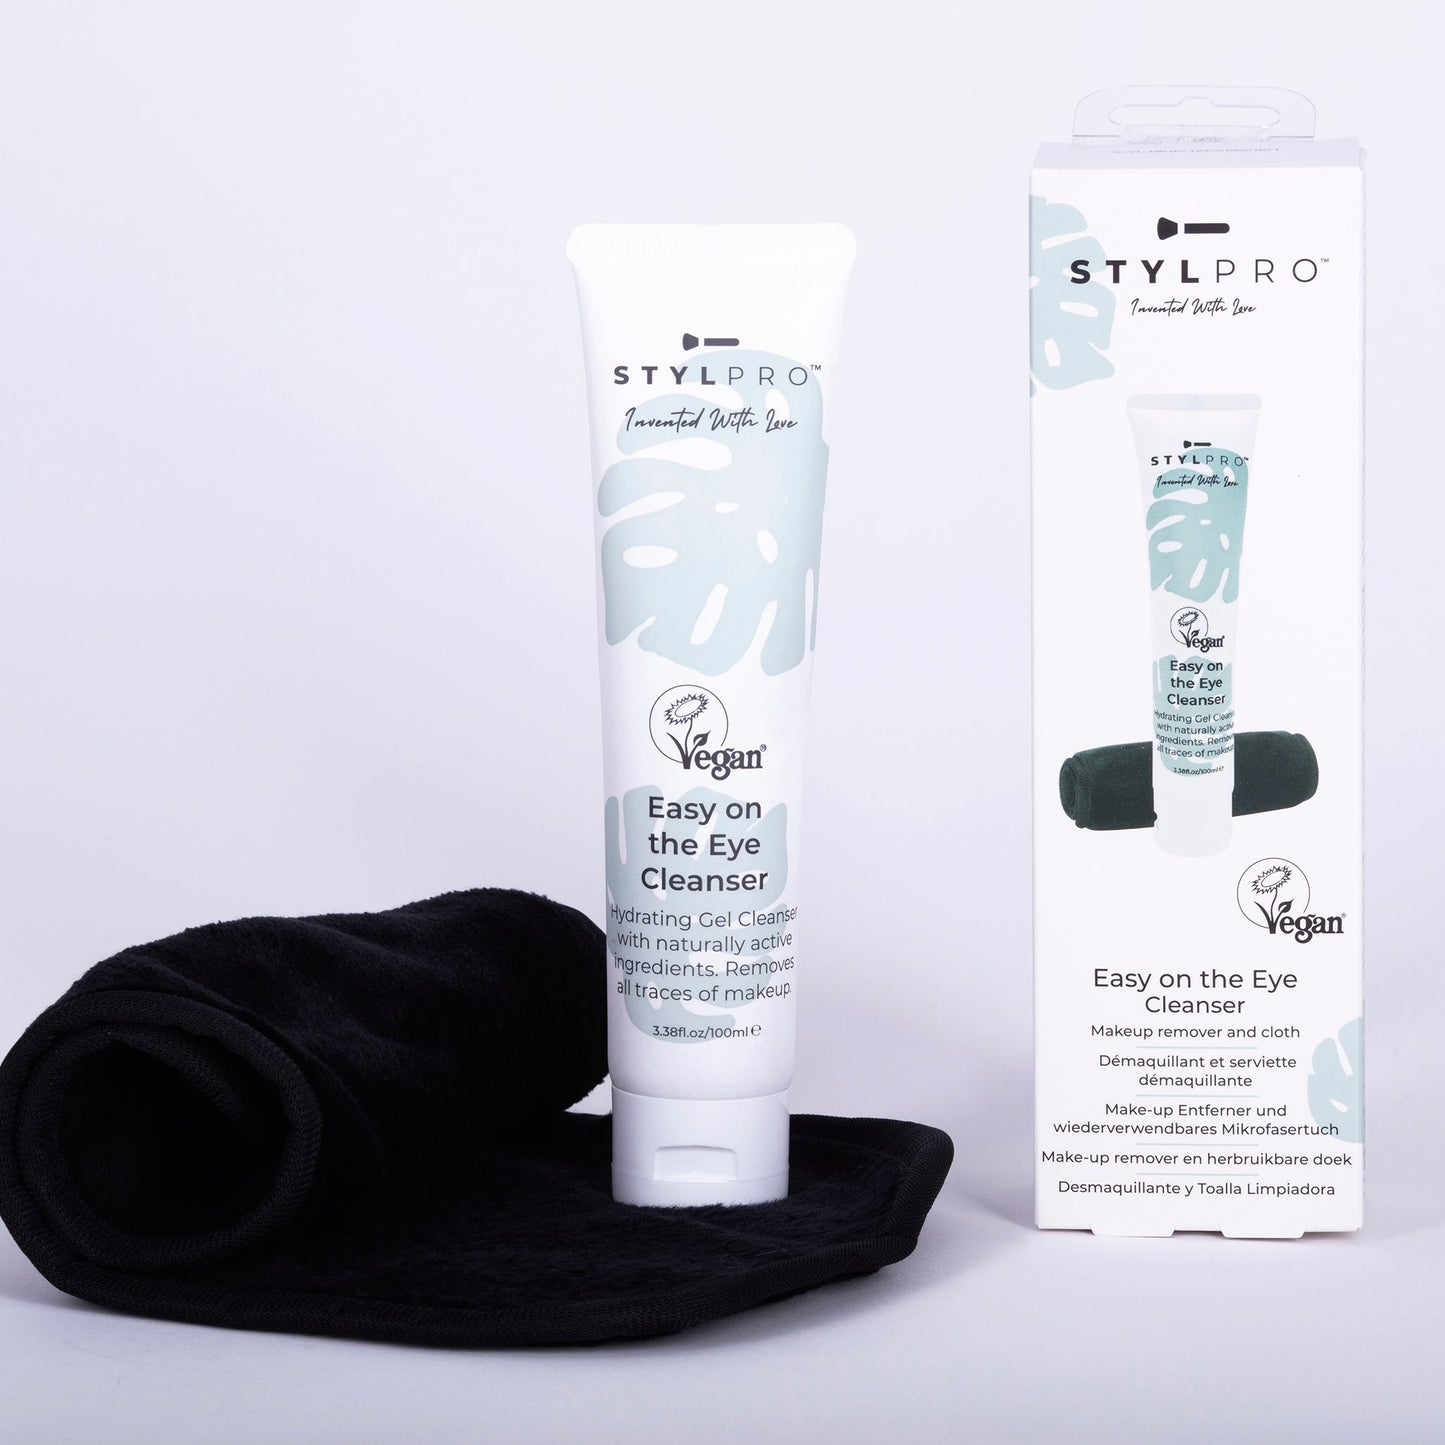 STYLPRO Easy on the Eye Makeup Remover